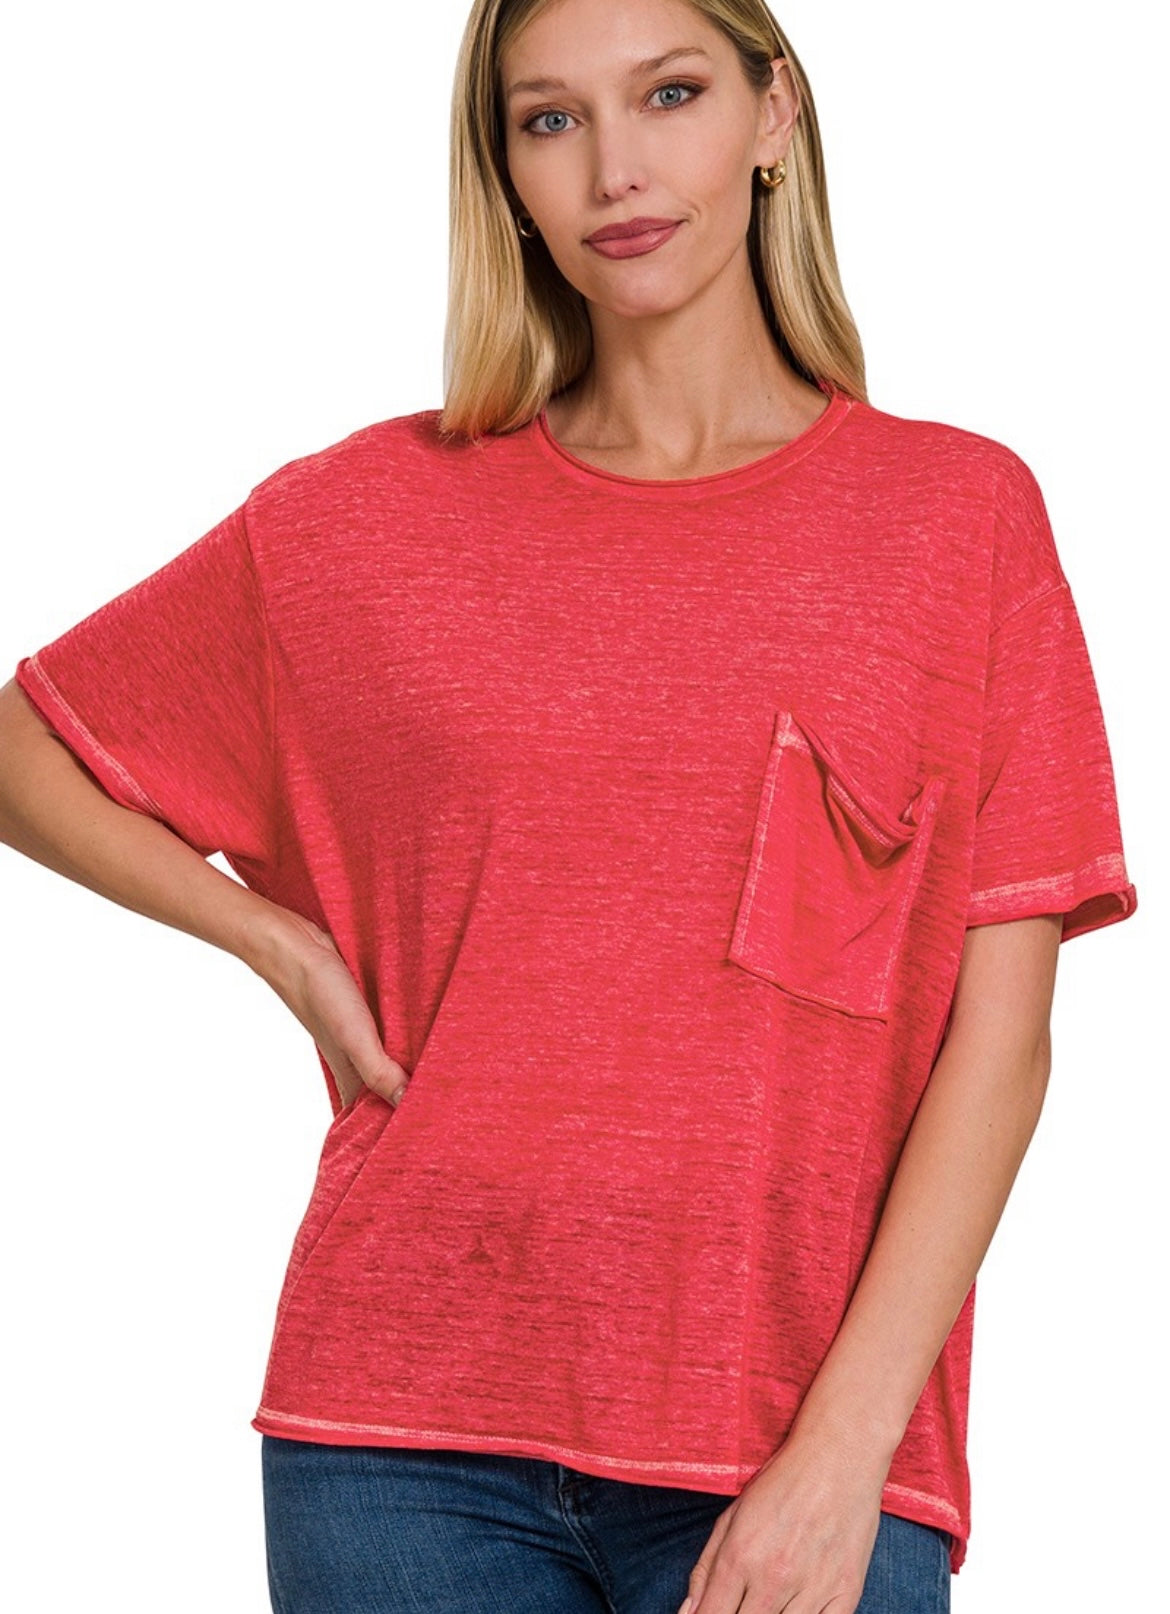 Oversized ripped red top